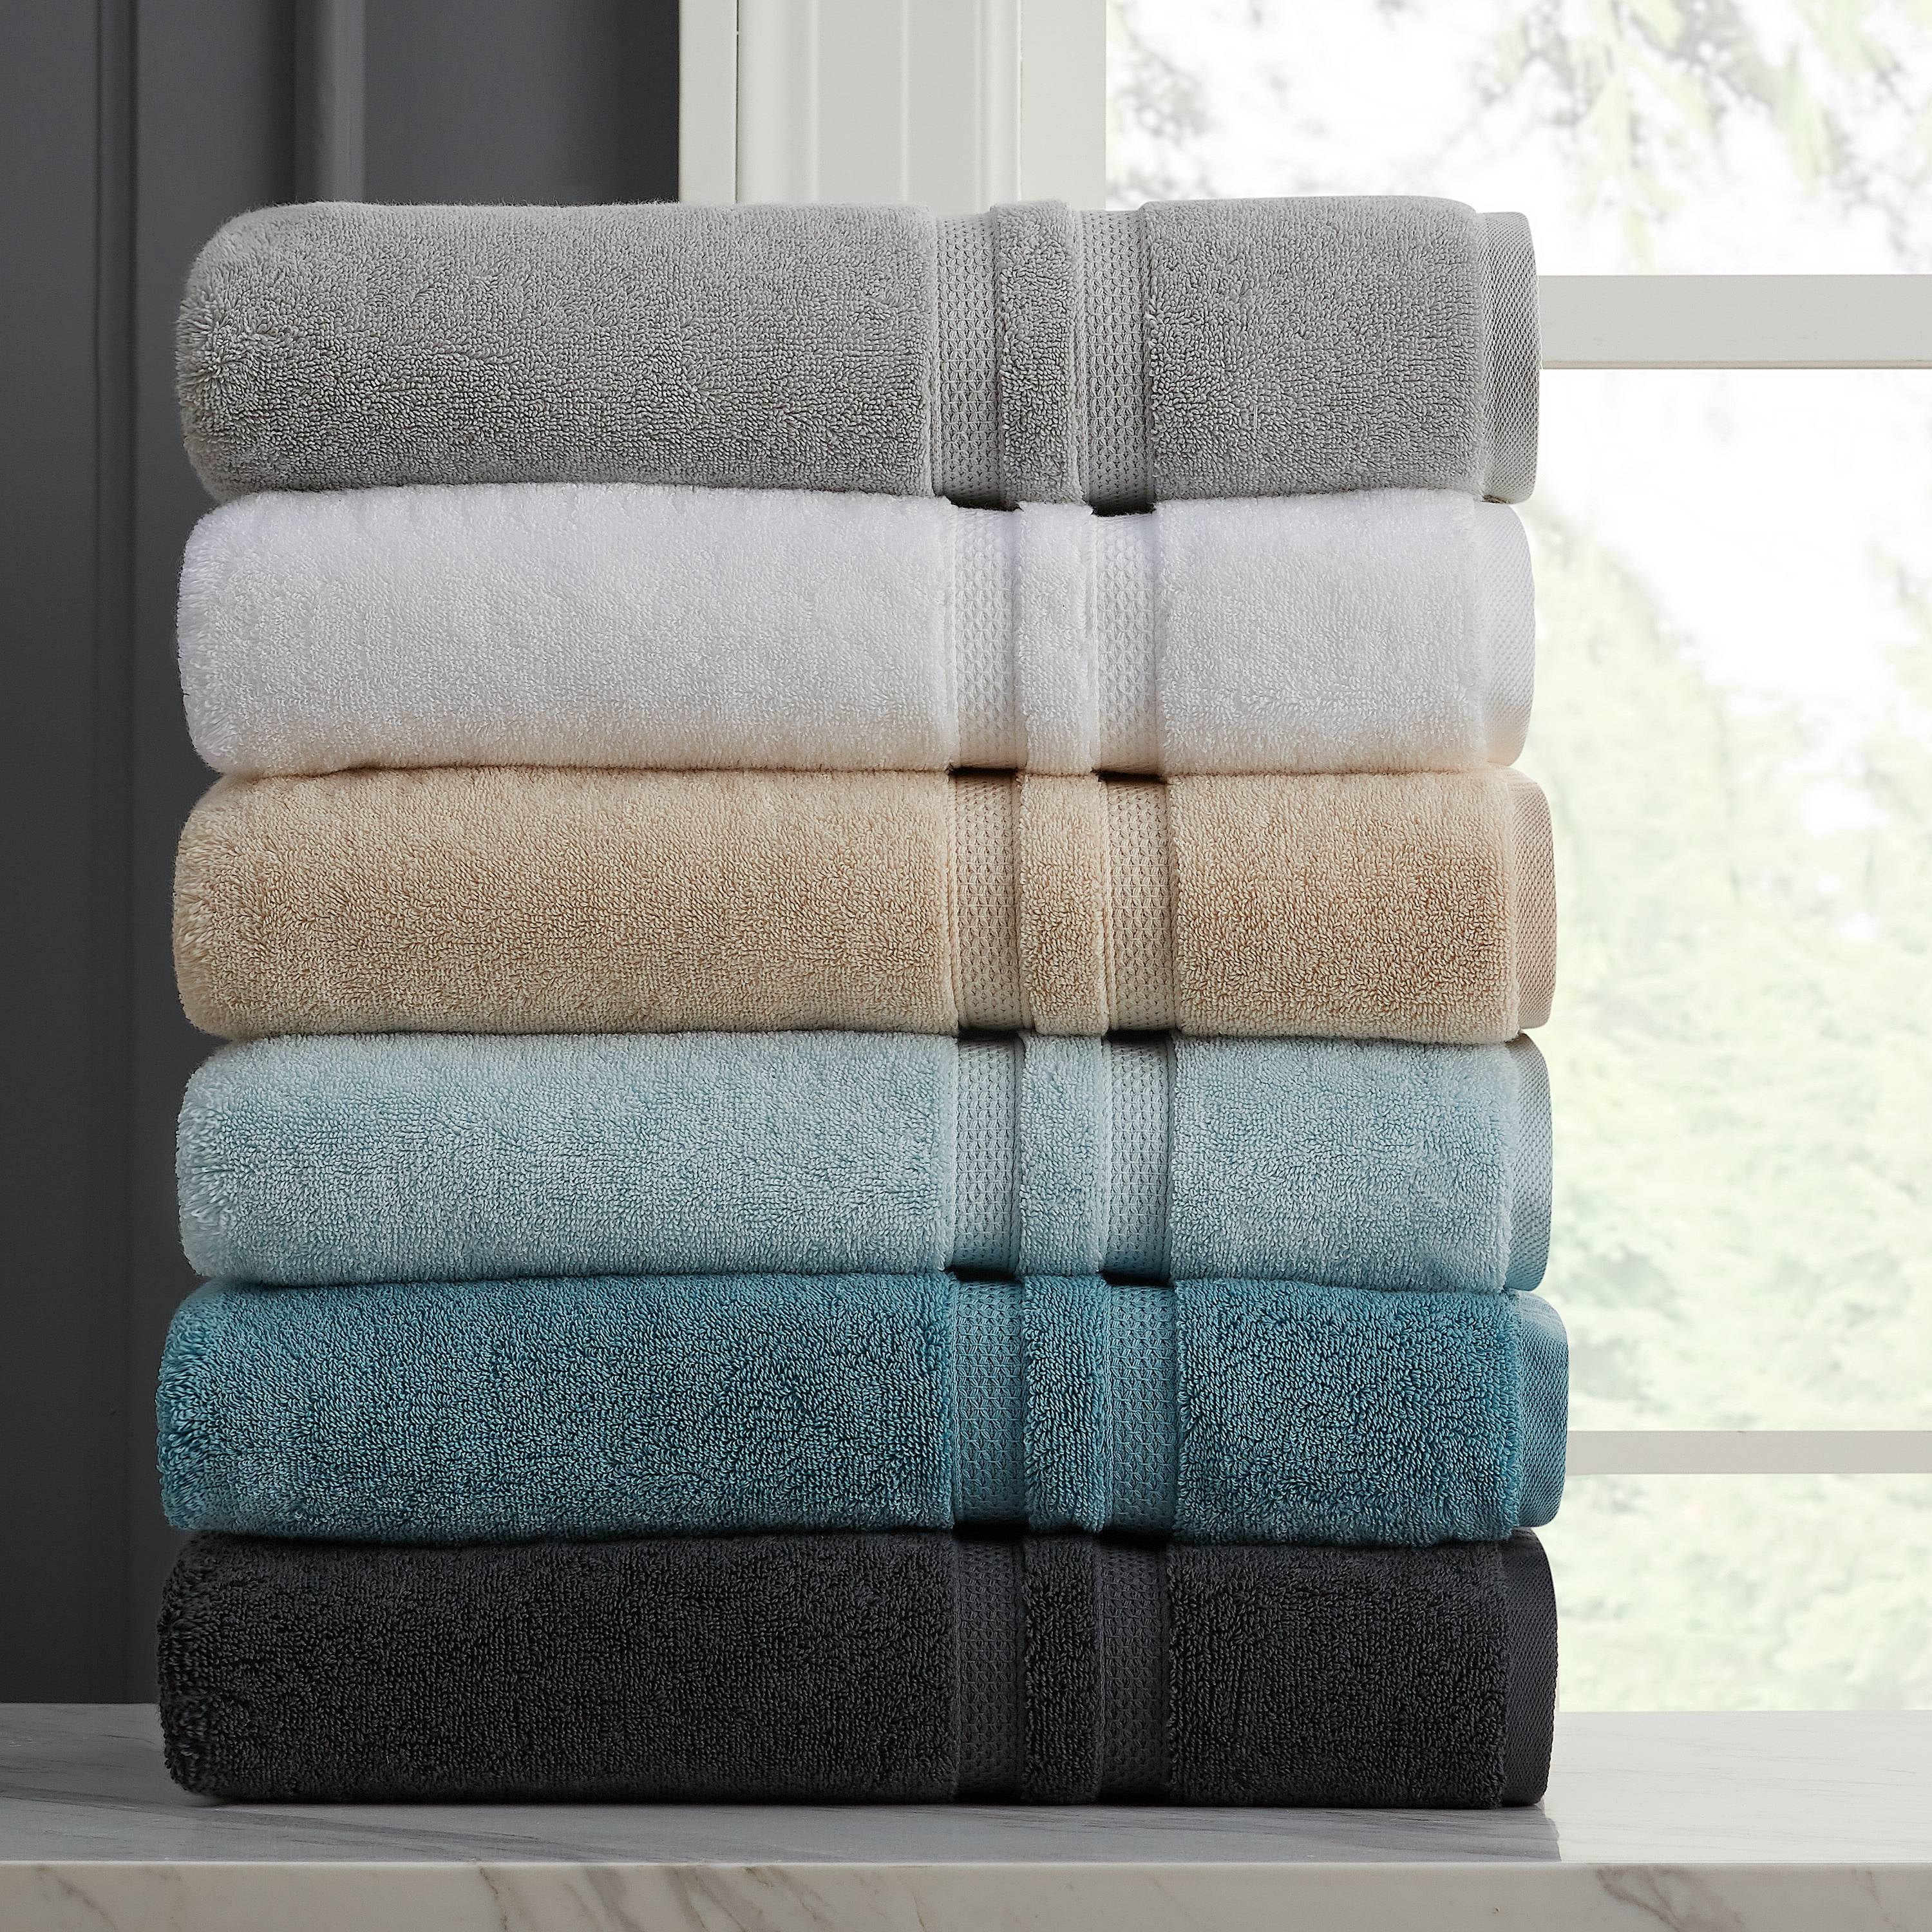 Pack of 2,4,8 or 24 Luxury Bath Sheets 100% Cotton Bathroom Shower Towel Sheets 